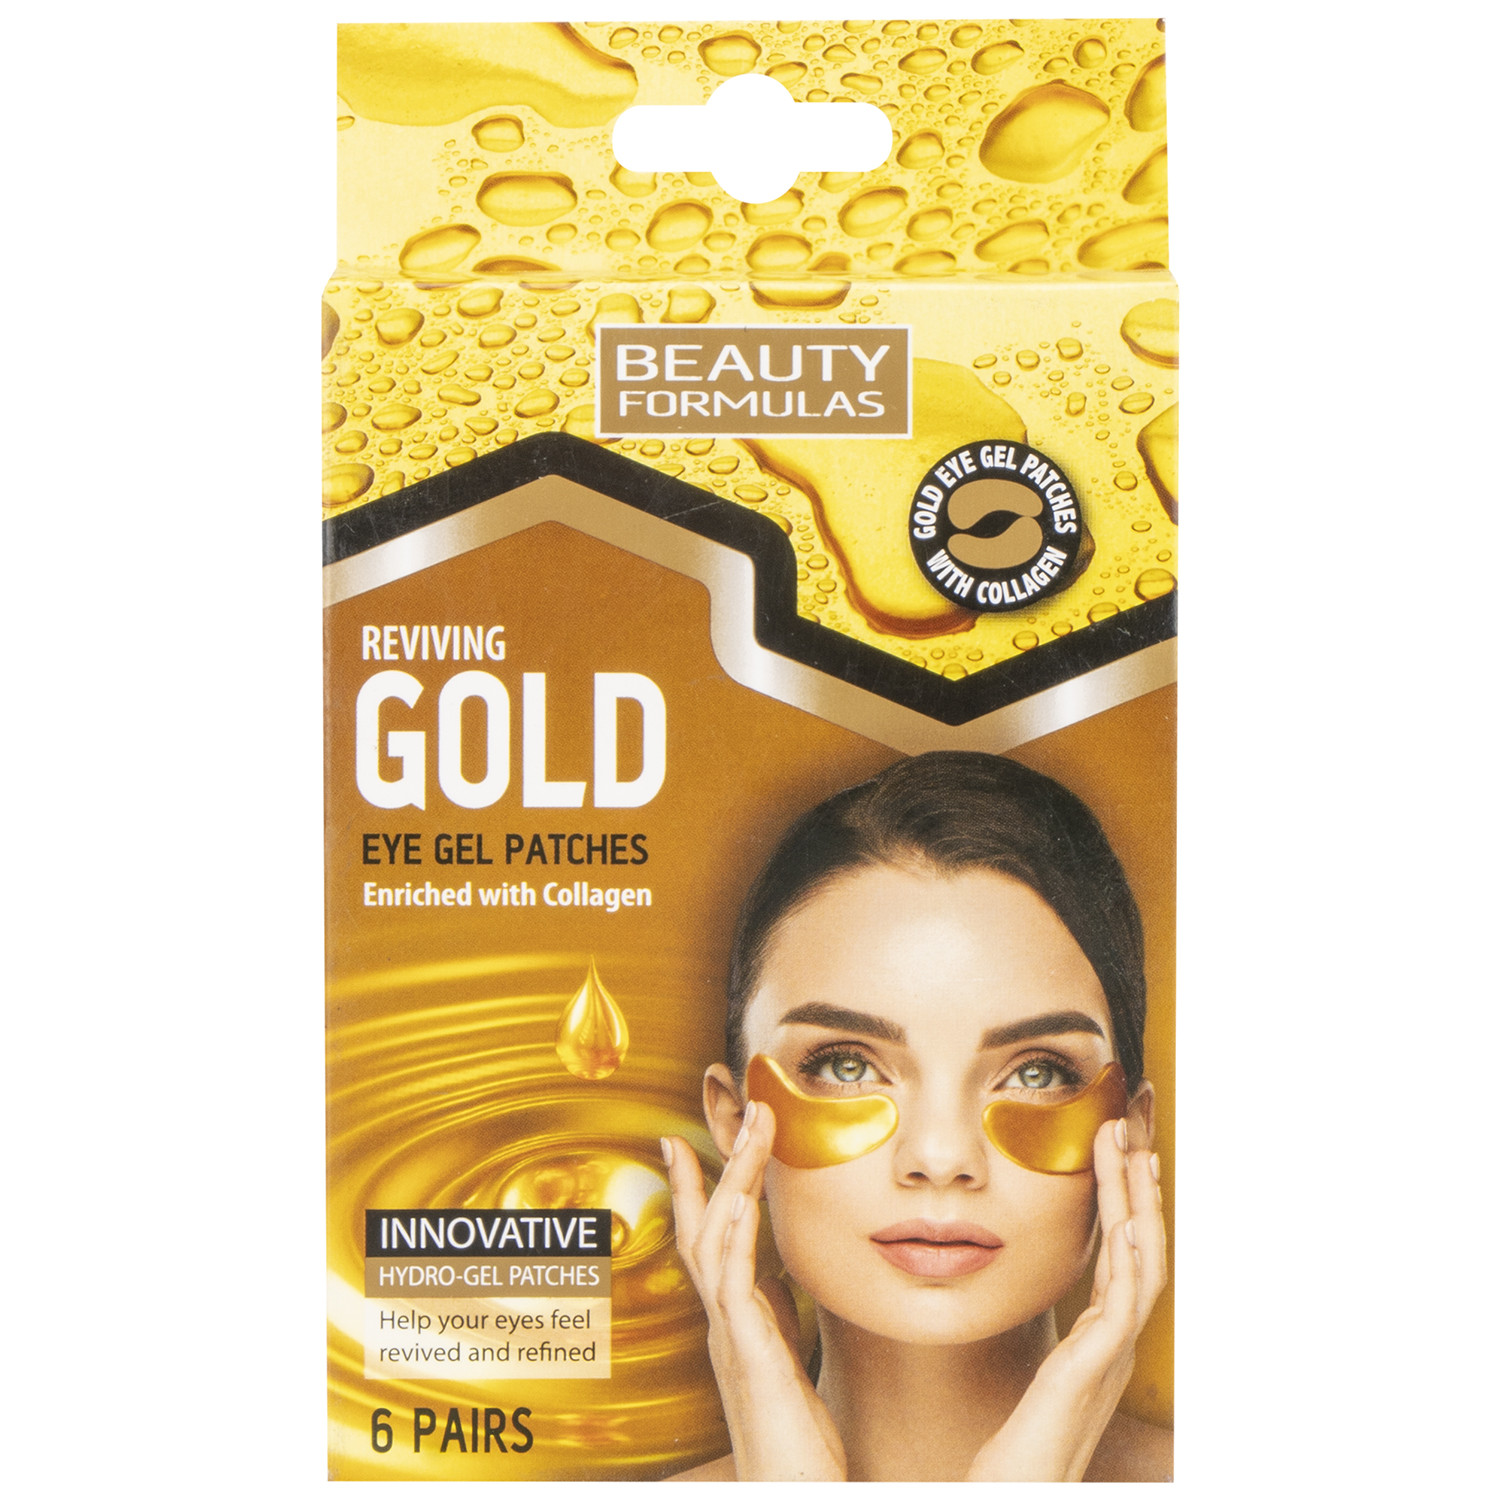 Beauty Formulas Reviving Gold Eye Gel Patches with Collagen 6 Pack Image